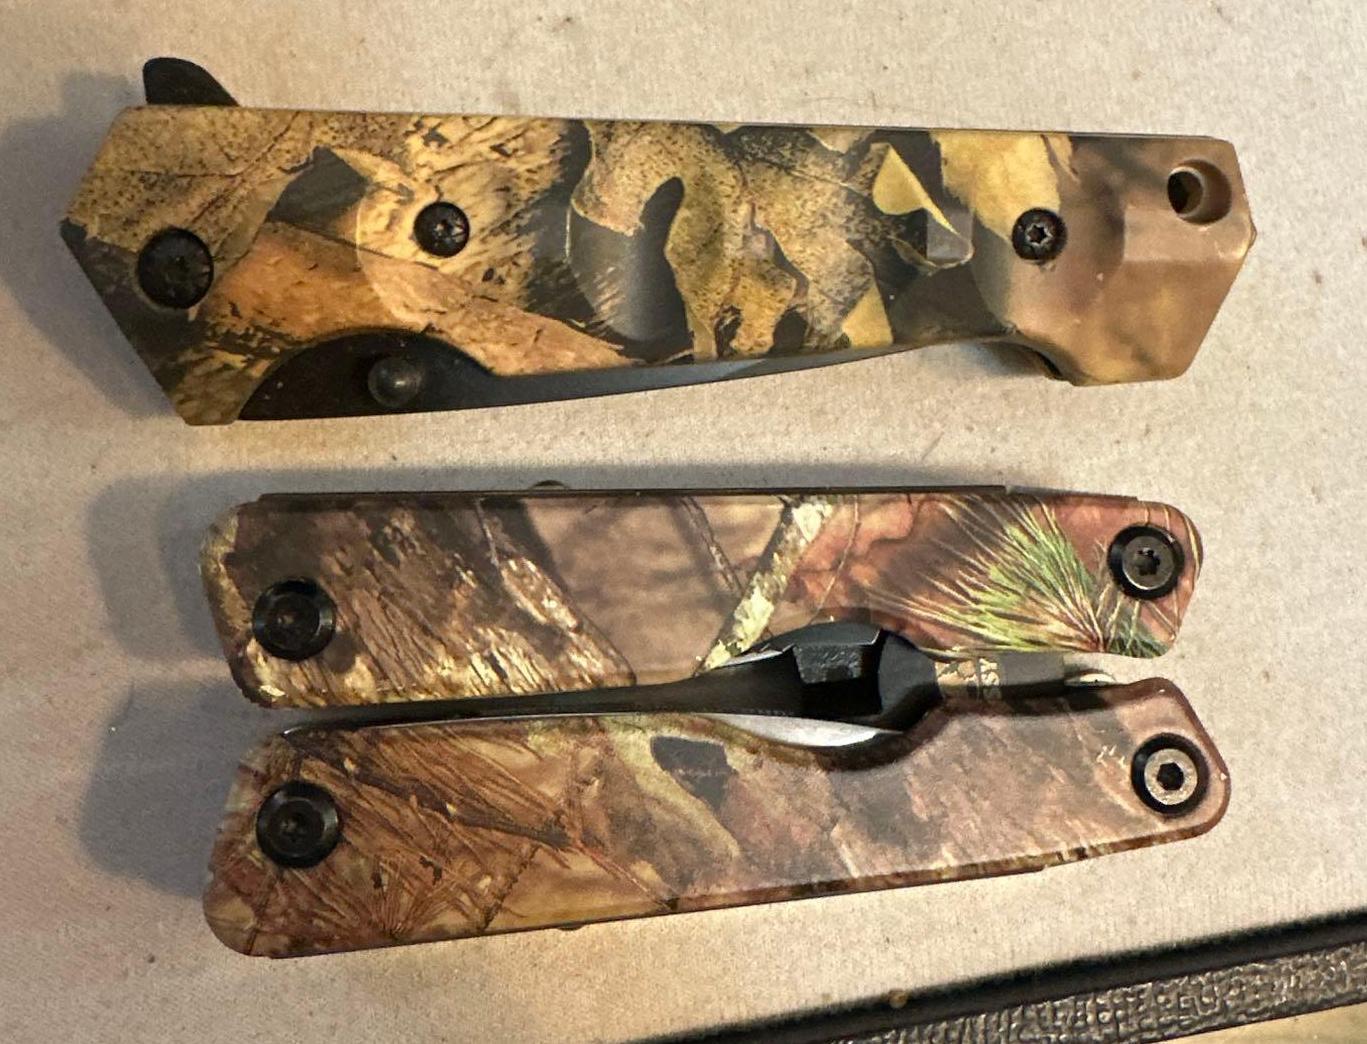 New Mossy Oak Knife and Multi tool